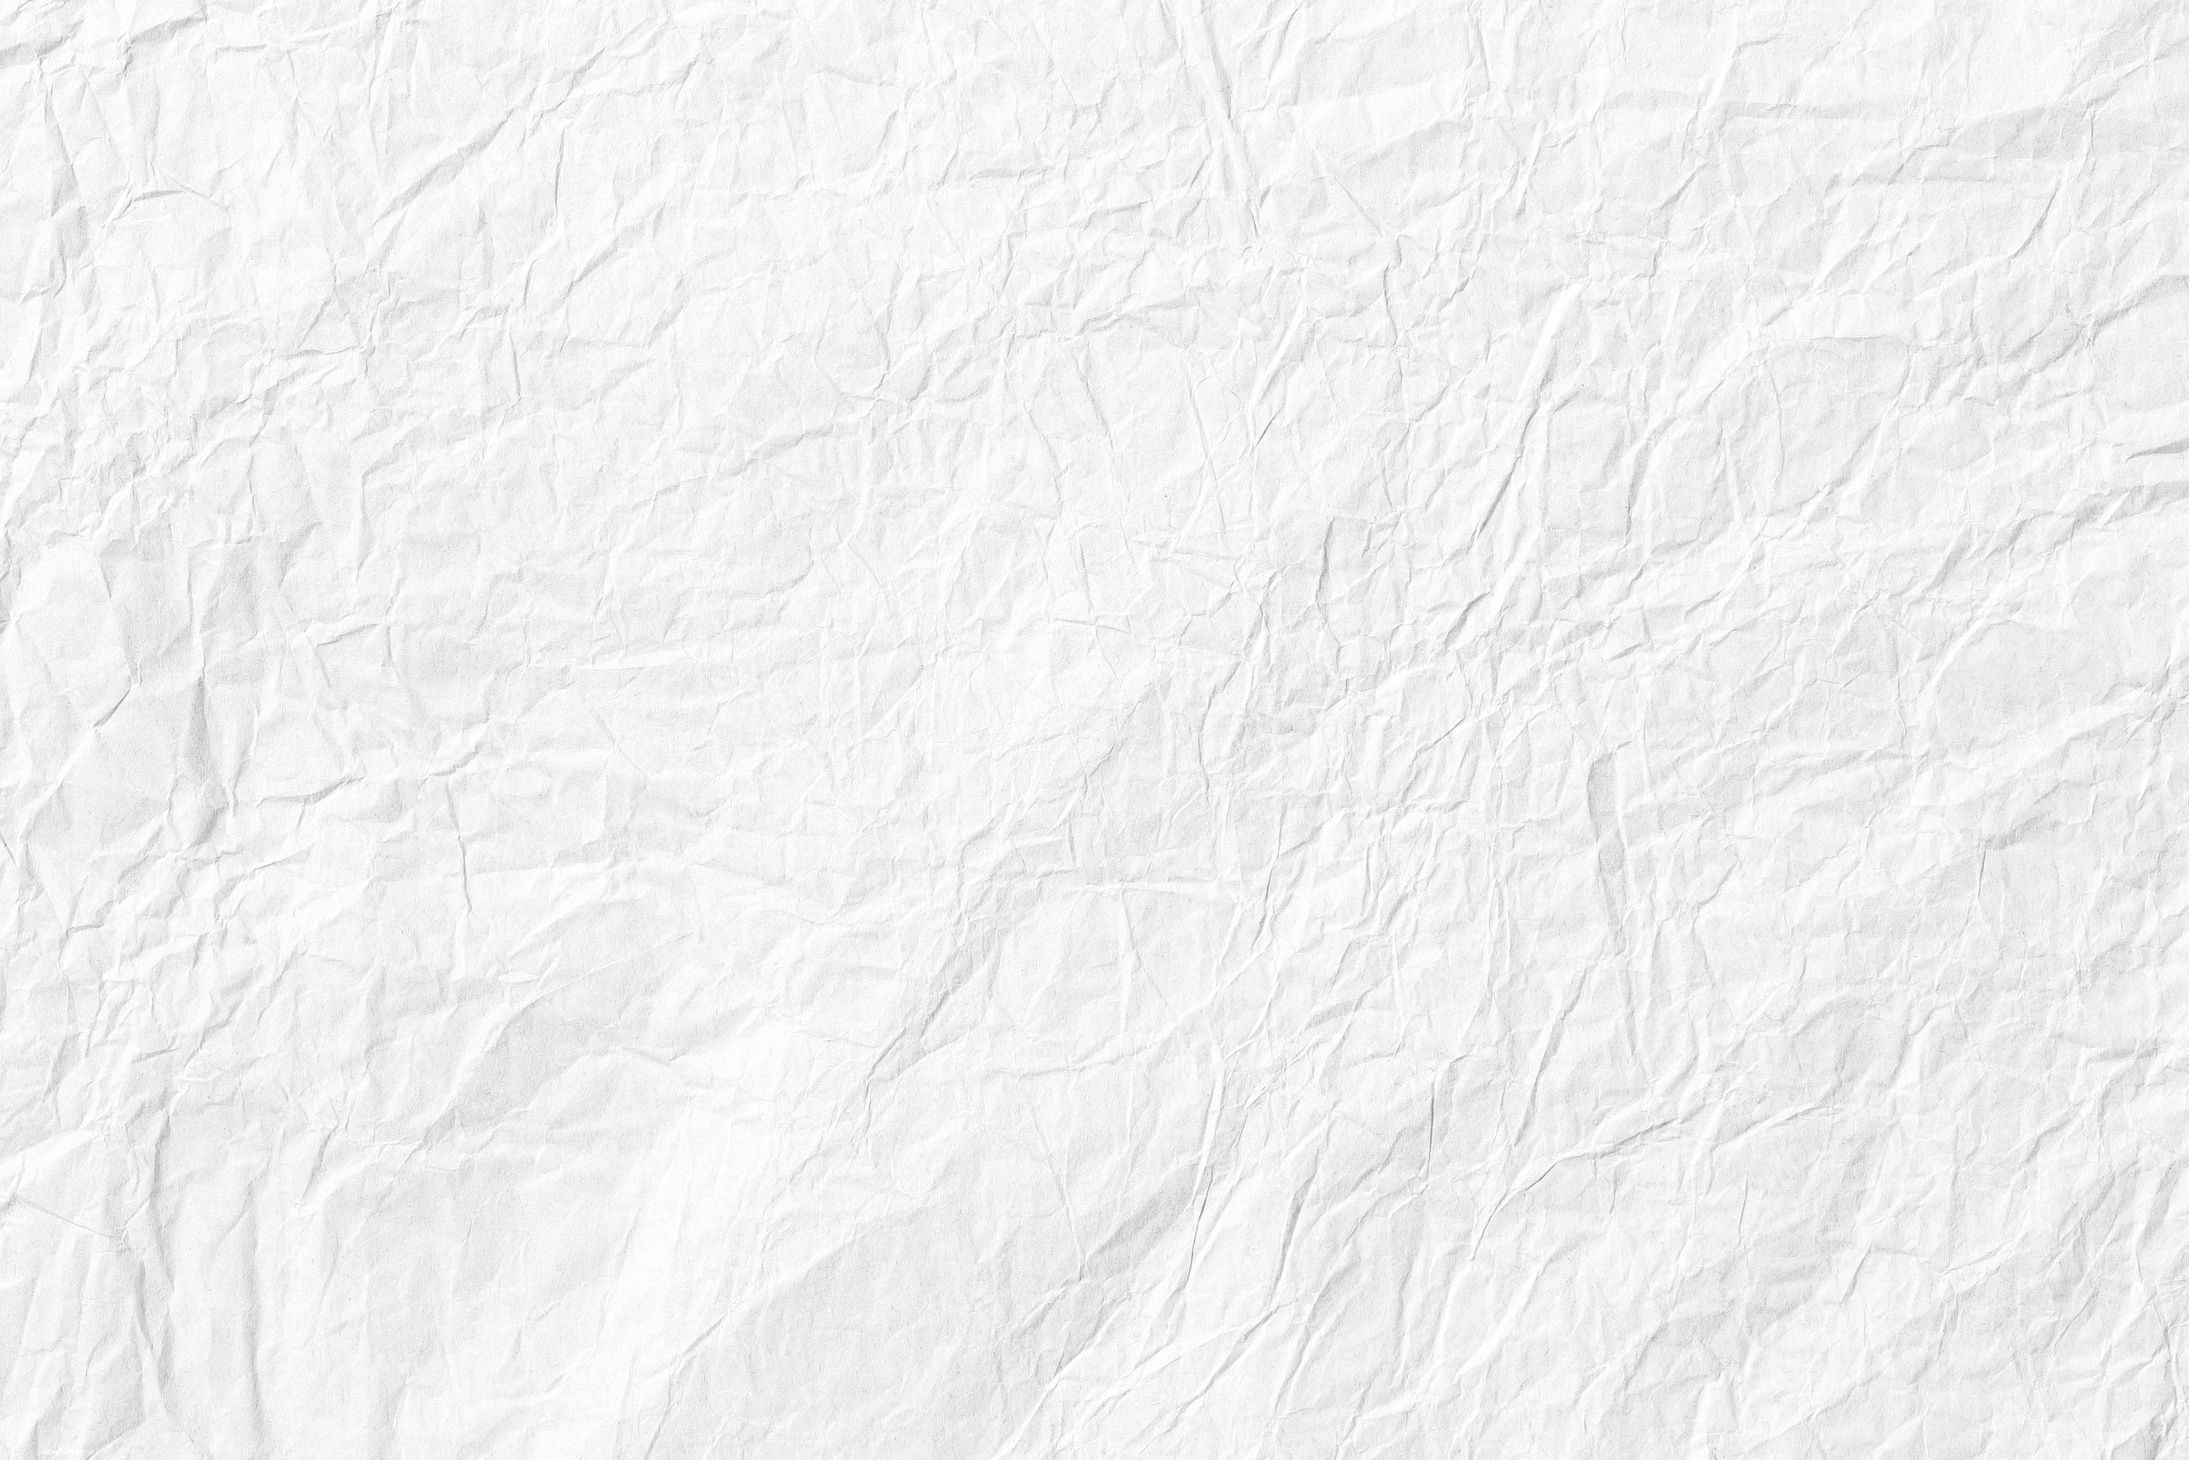 white paper crumpled background texture